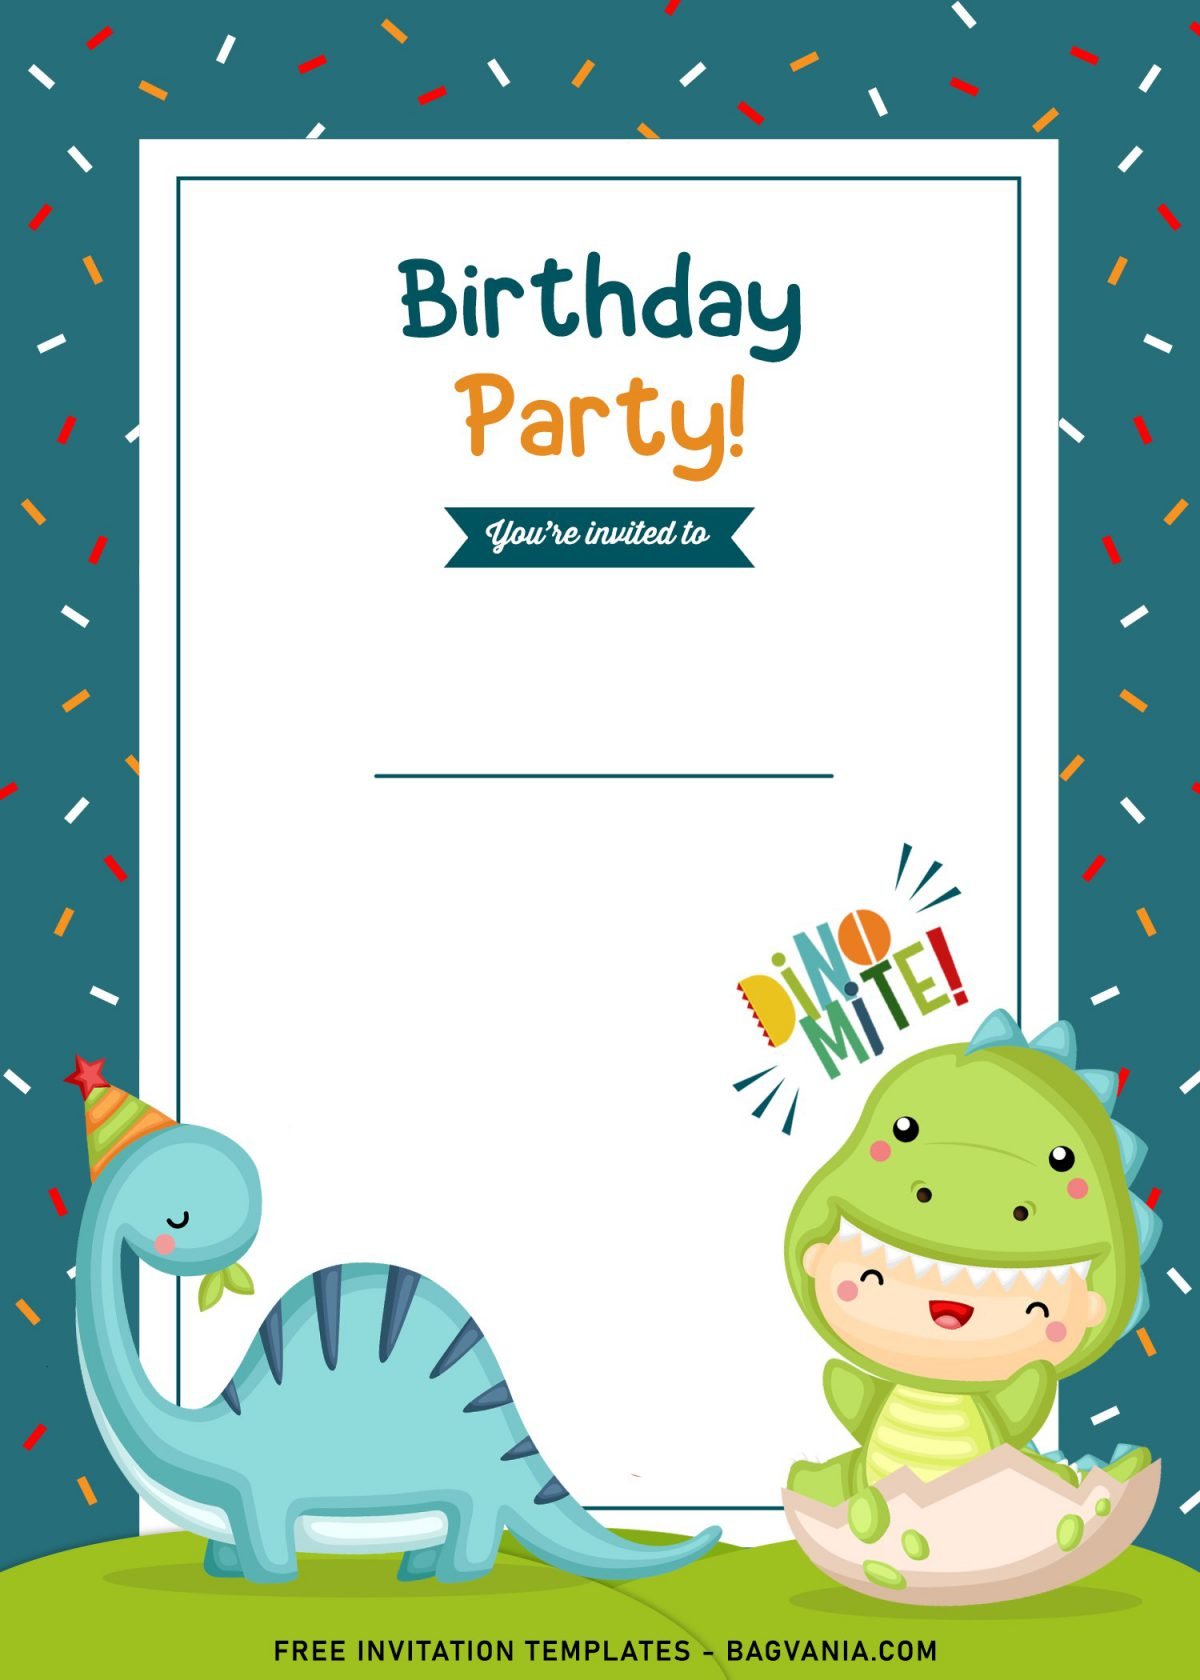 9+ Awesome Dino Party Birthday Invitation Templates and has Cute Baby Brachiosaurus 